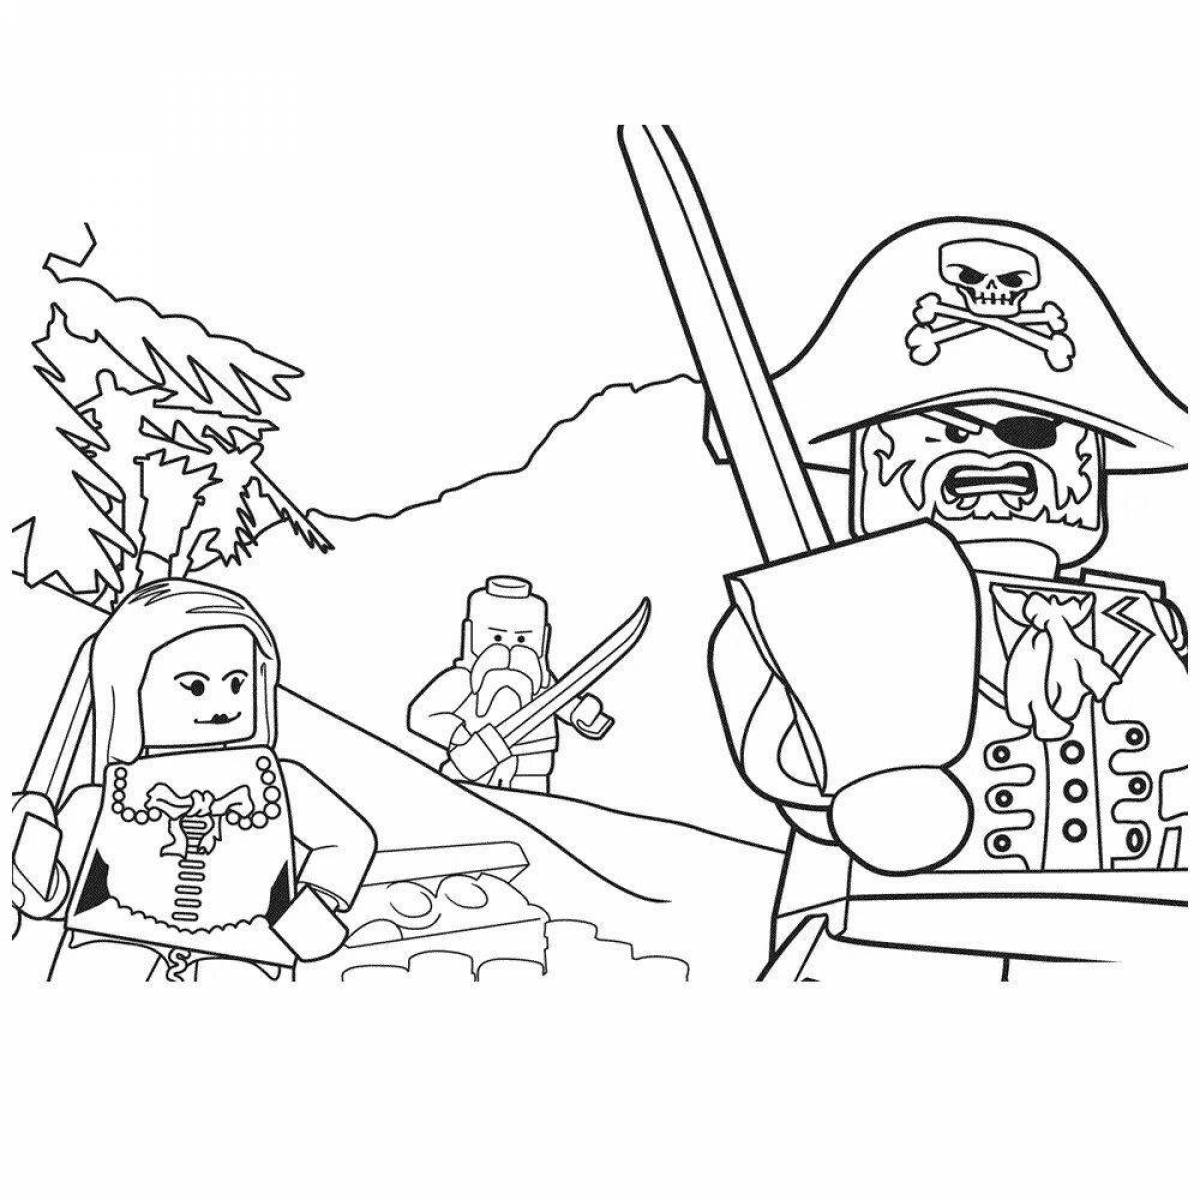 Lego zombie coloring book